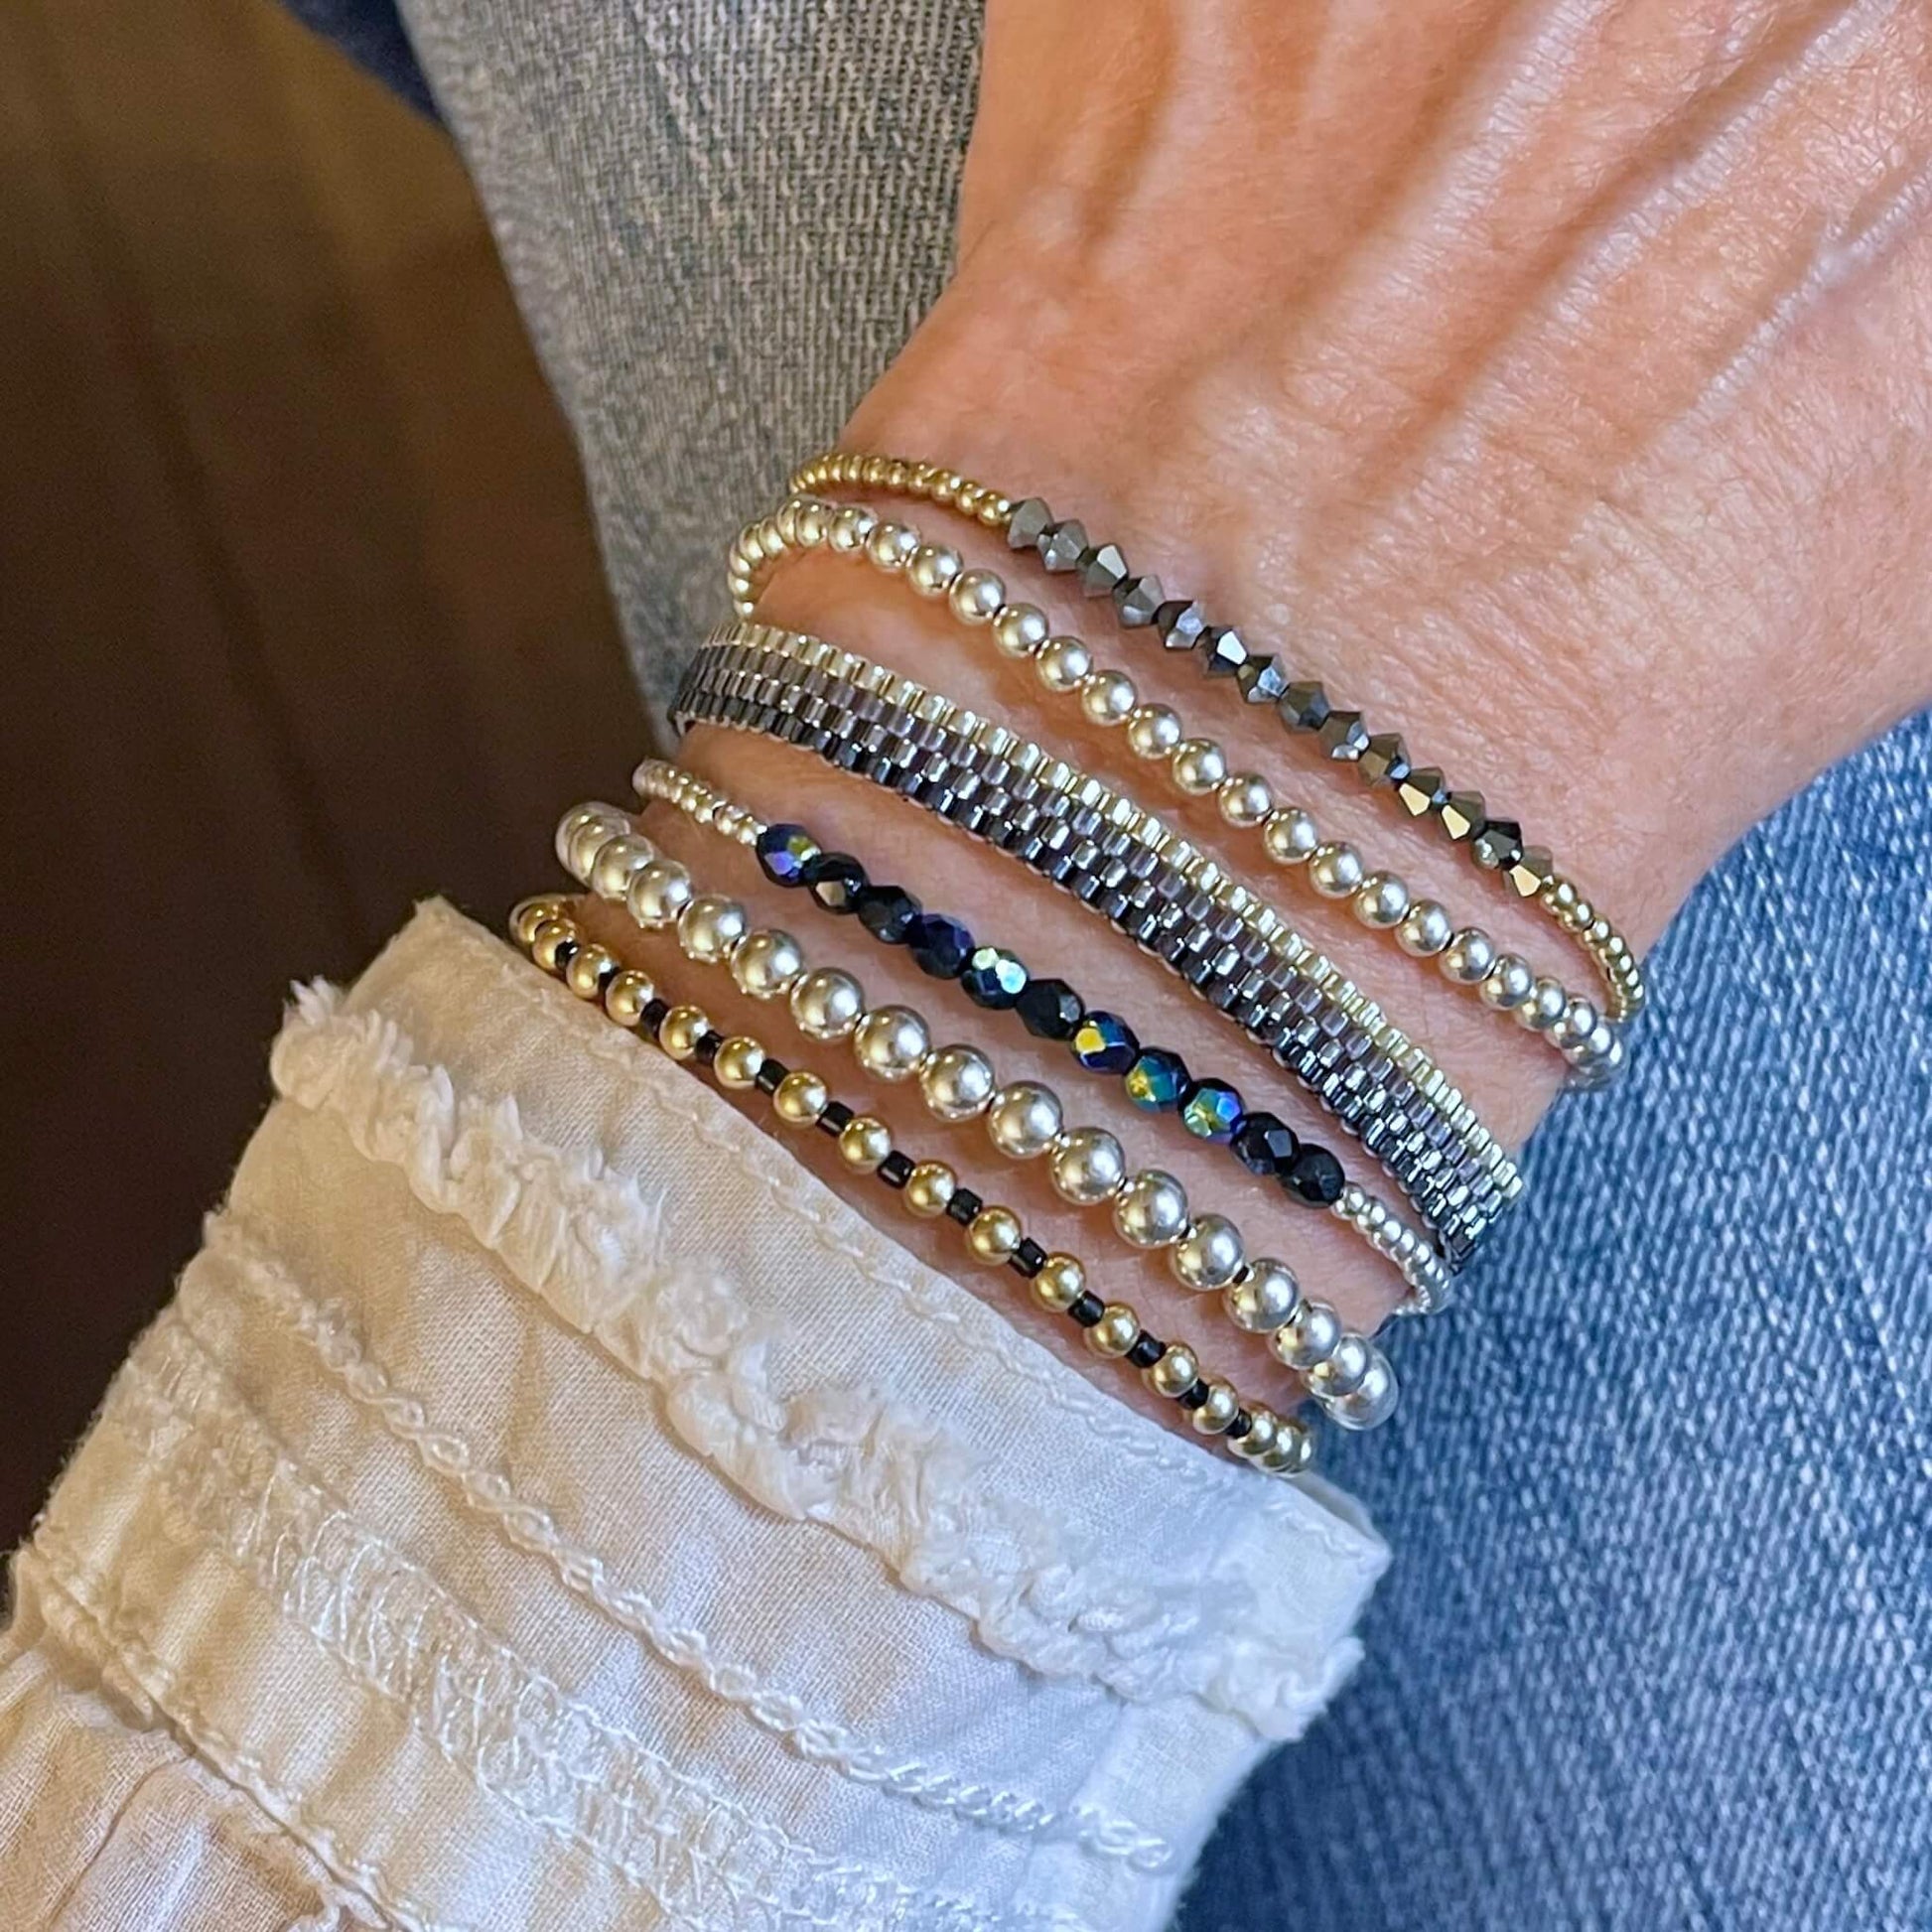 Handmade bracelets beaded with small metallic seed beads in a thin woven band, and silver, gold, and crystal stretch bracelets.